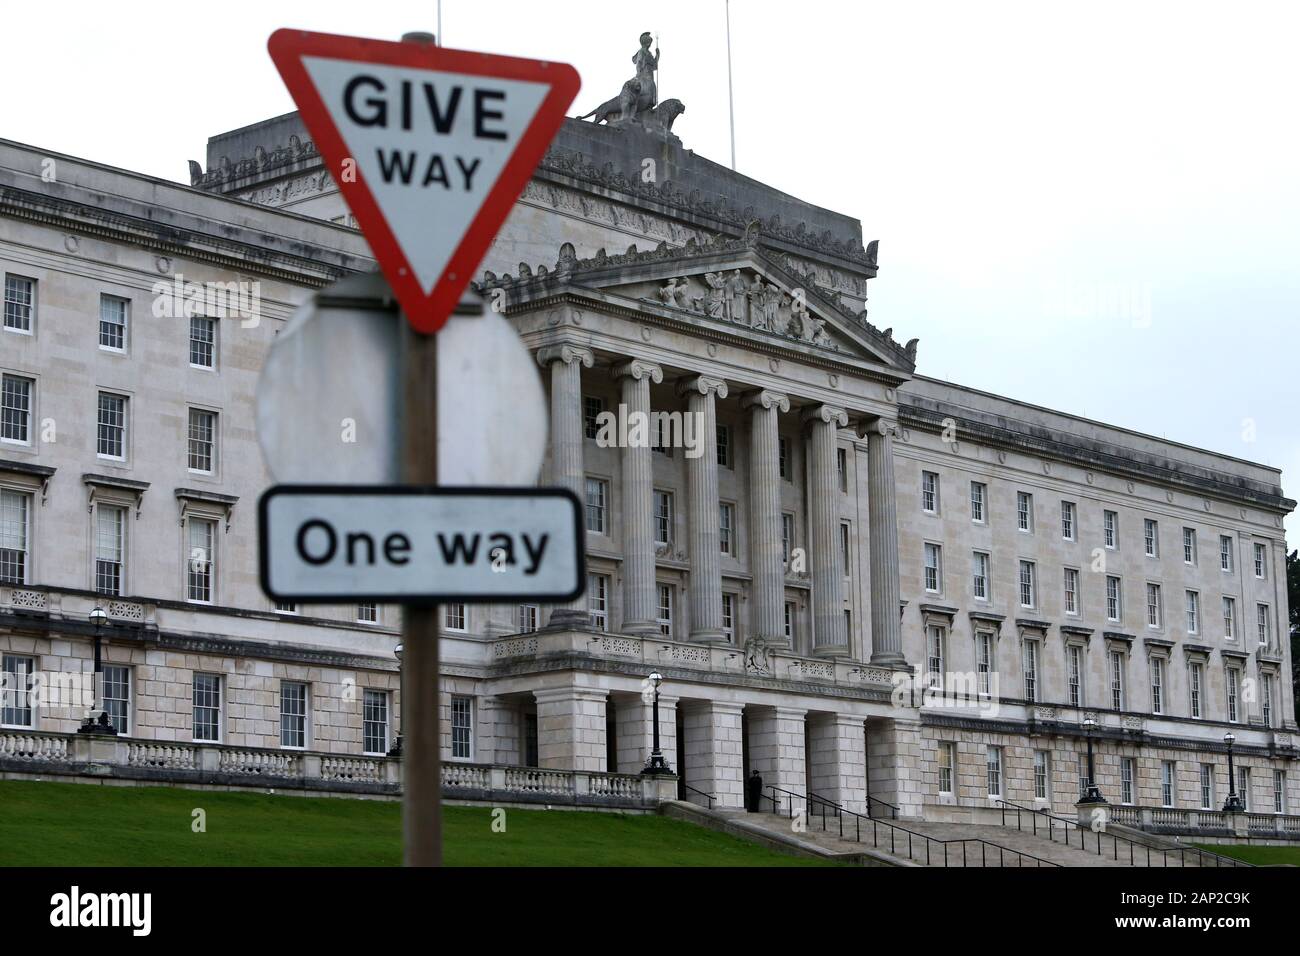 The Parliament Buildings at Stormont are pictured in Belfast on January 14, 2020. Parliament Buildings, often referred to as Stormont because of its location in the Stormont Estate area of Belfast, is the seat of the Northern Ireland Assembly, the devolved legislature for the region. The Executive or government is located at Stormont Castle. Photo/Paul McErlane (www.paulmcerlane.net) Stock Photo